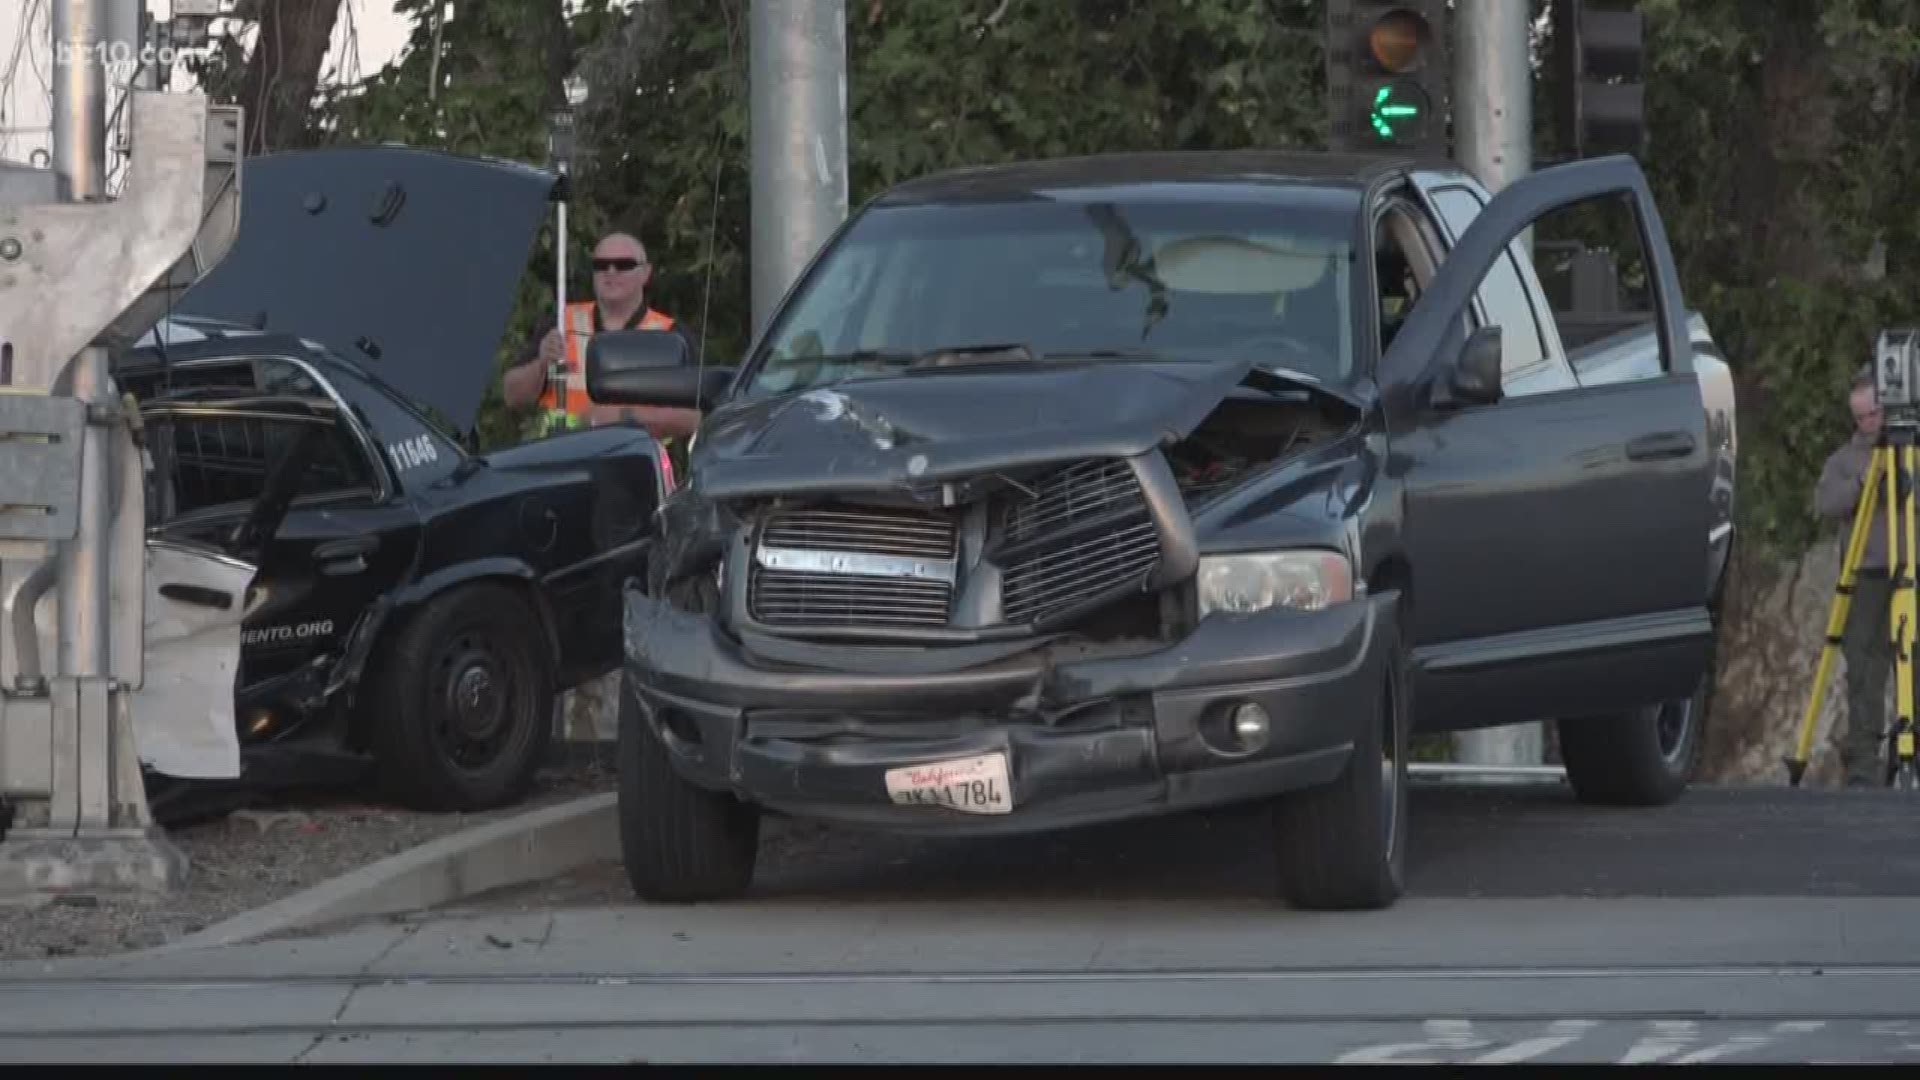 The officer was driving a patrol vehicle Westbound on Richards Boulevard when he collided with a gray Dodge pickup truck traveling Northbound on 16th Street.